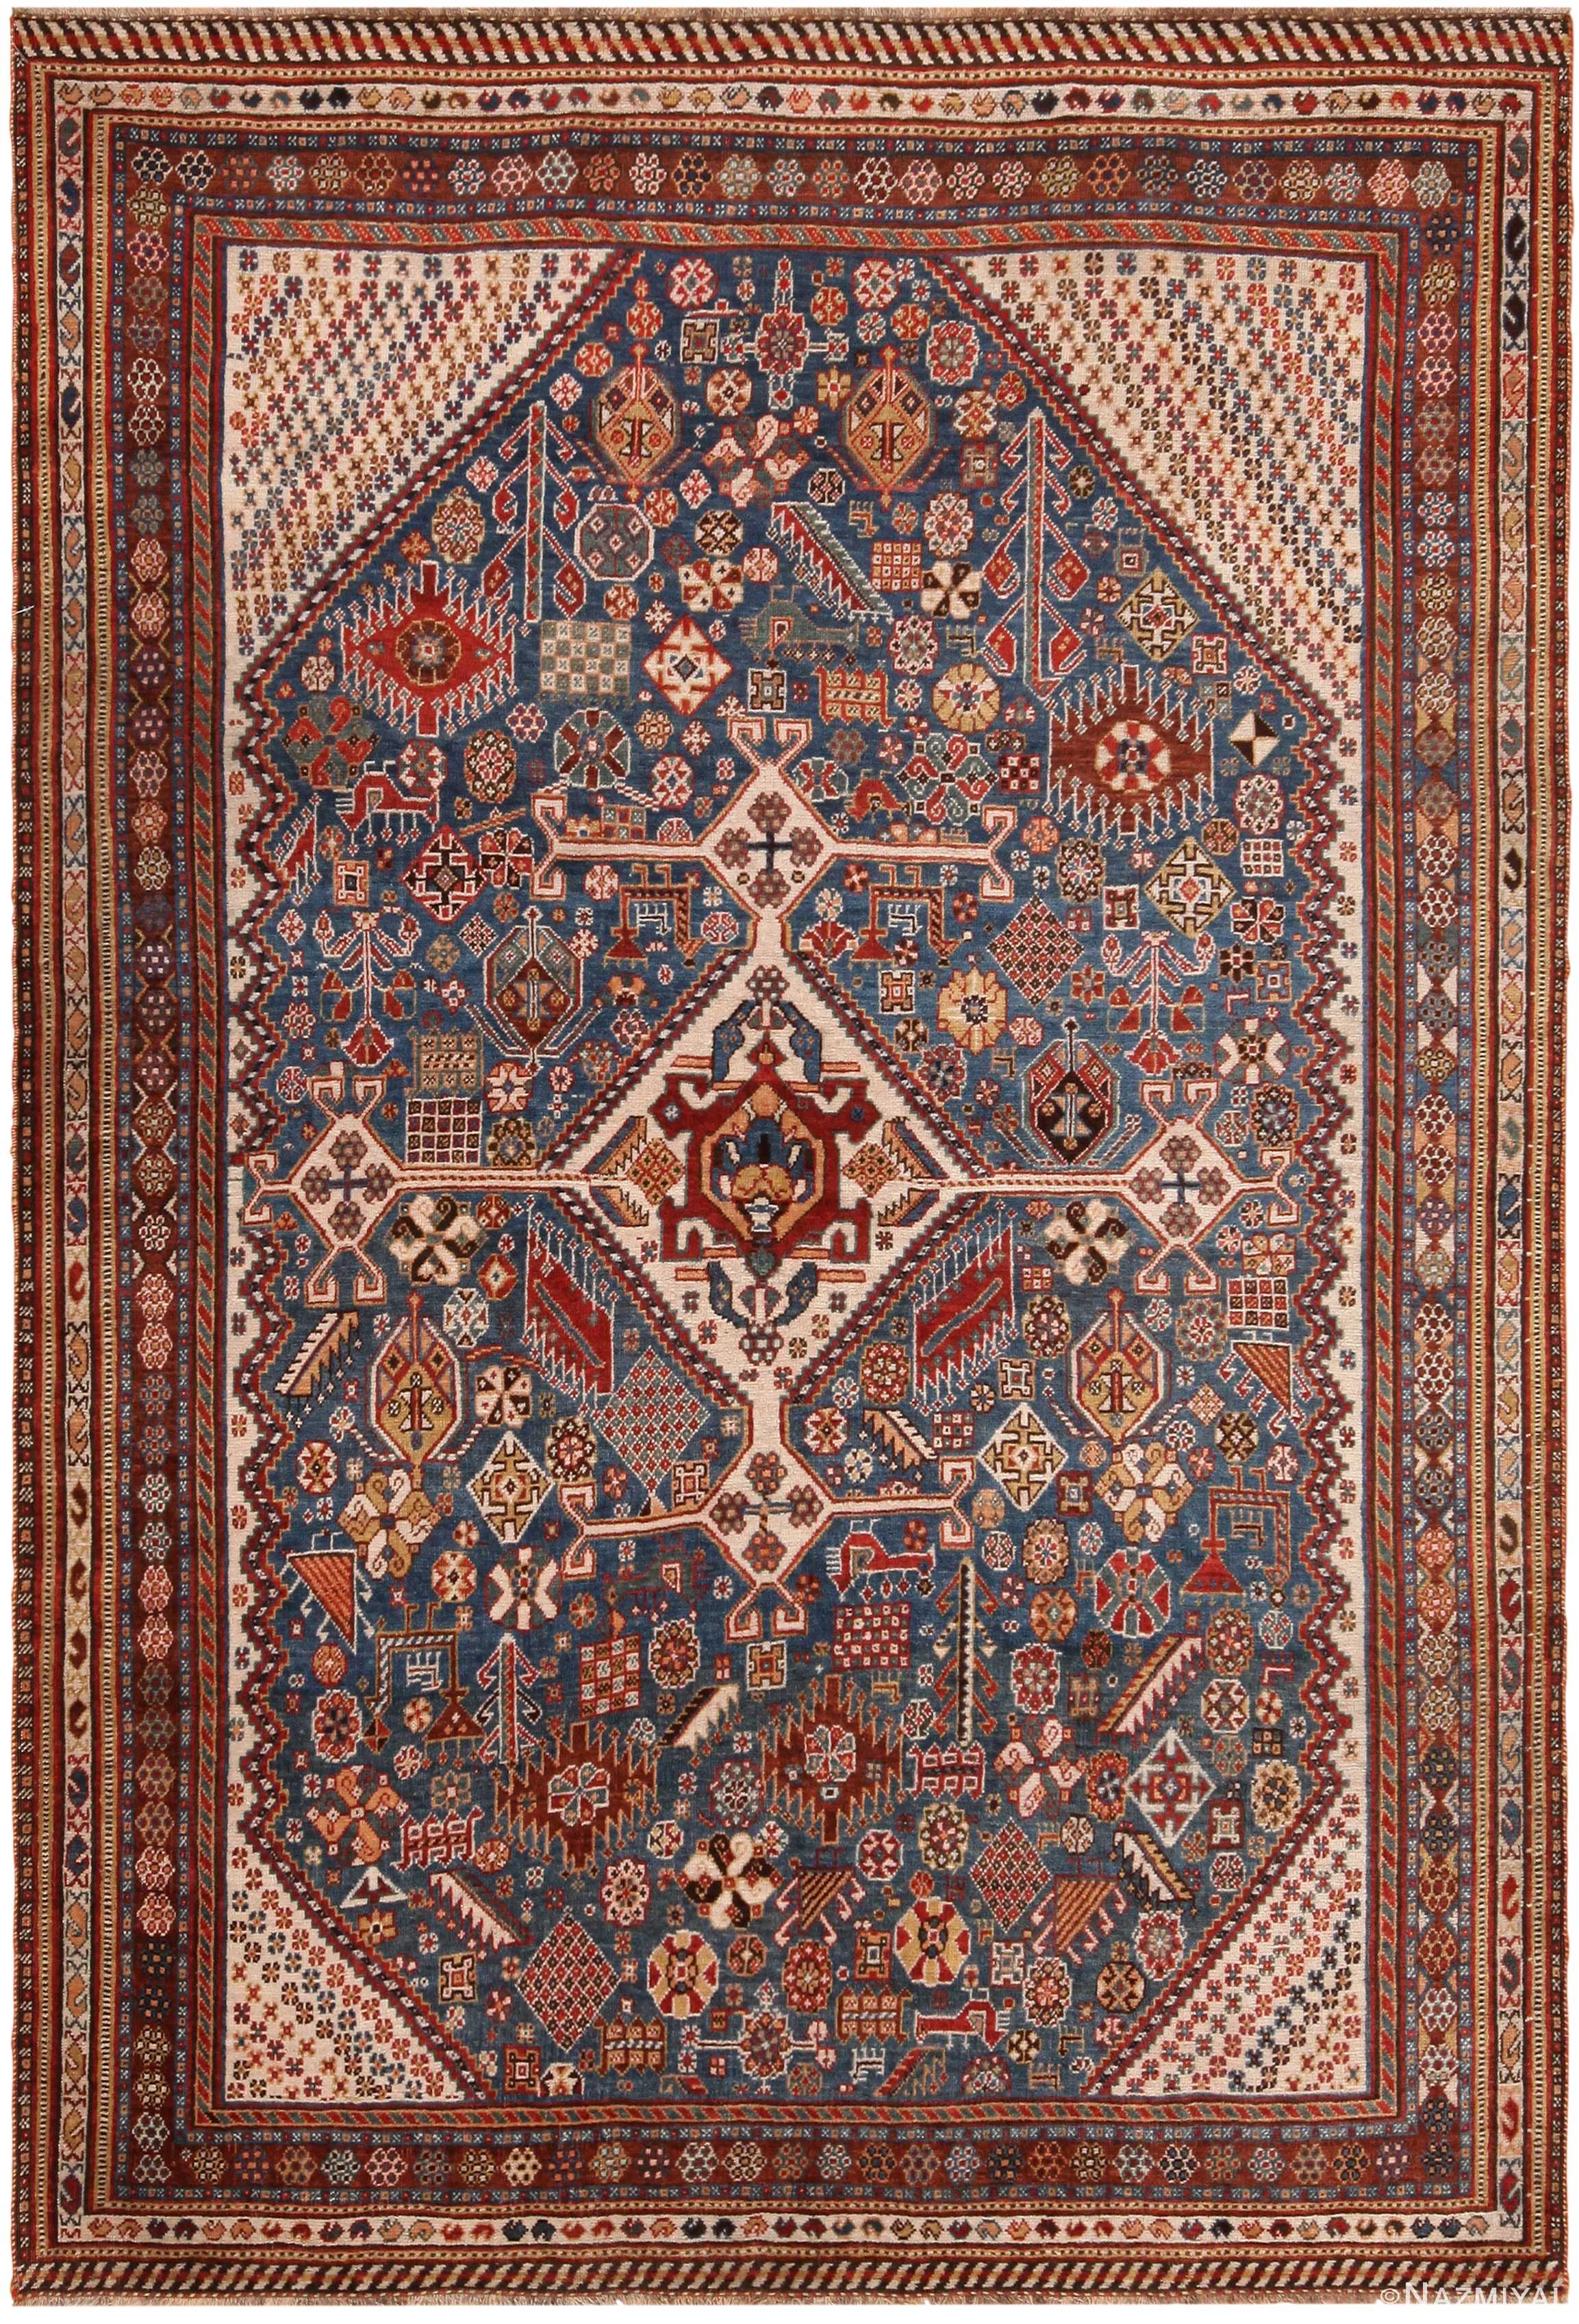 Blue Background Antique Persian Qashqai Rug 71457 by Nazmiyal Antique Rugs